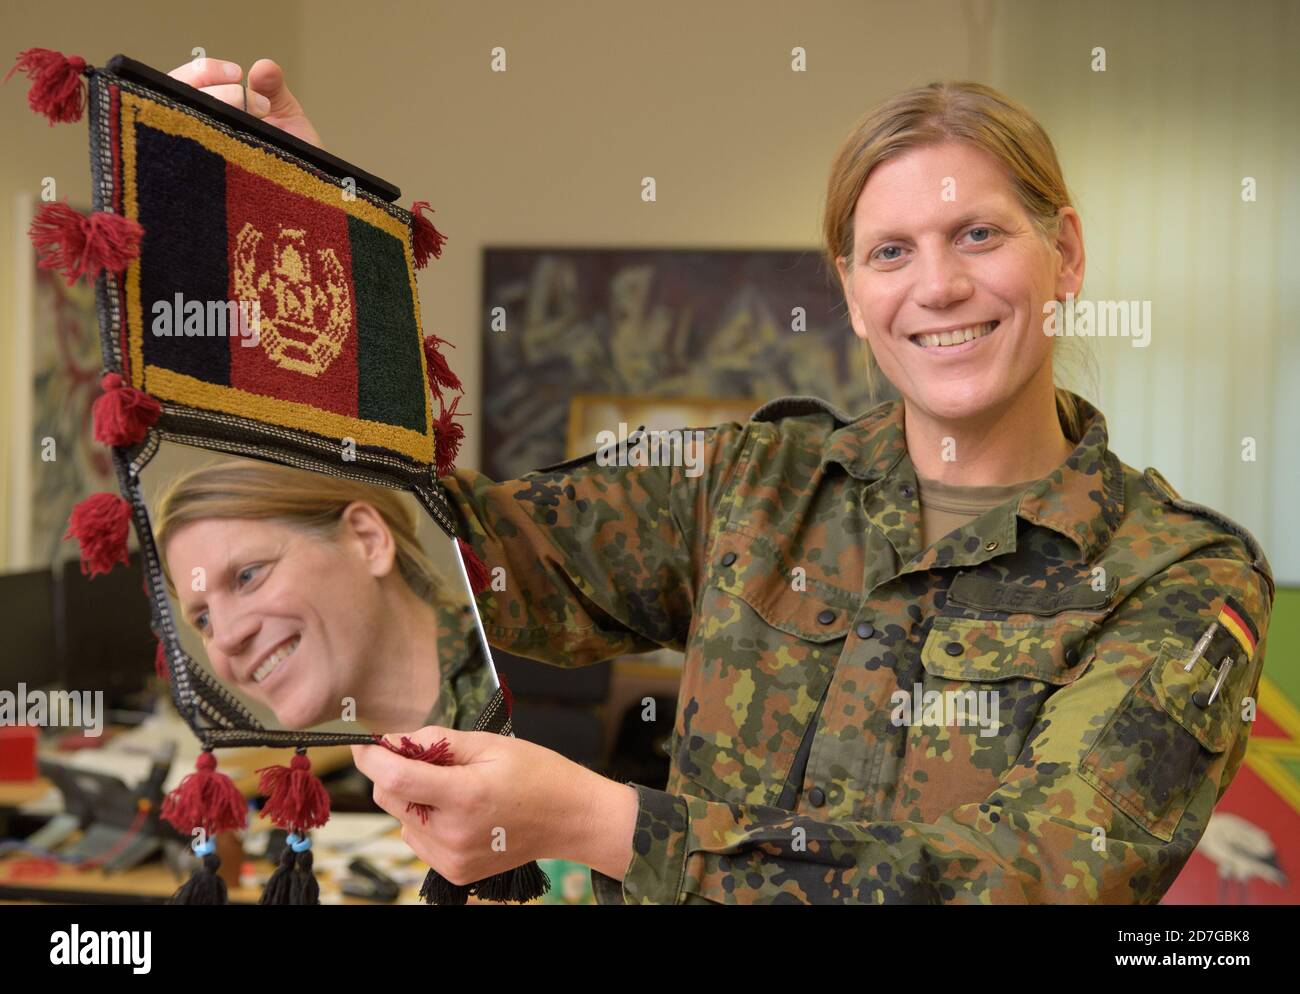 15 October 2020, Brandenburg, Storkow (Mark): Lieutenant Colonel Anastasia  Biefang, Commander of Information Technology Battalion 381, holds a  portable, collapsible make-up mirror at Kurmark Barracks, which she  received as a guest gift